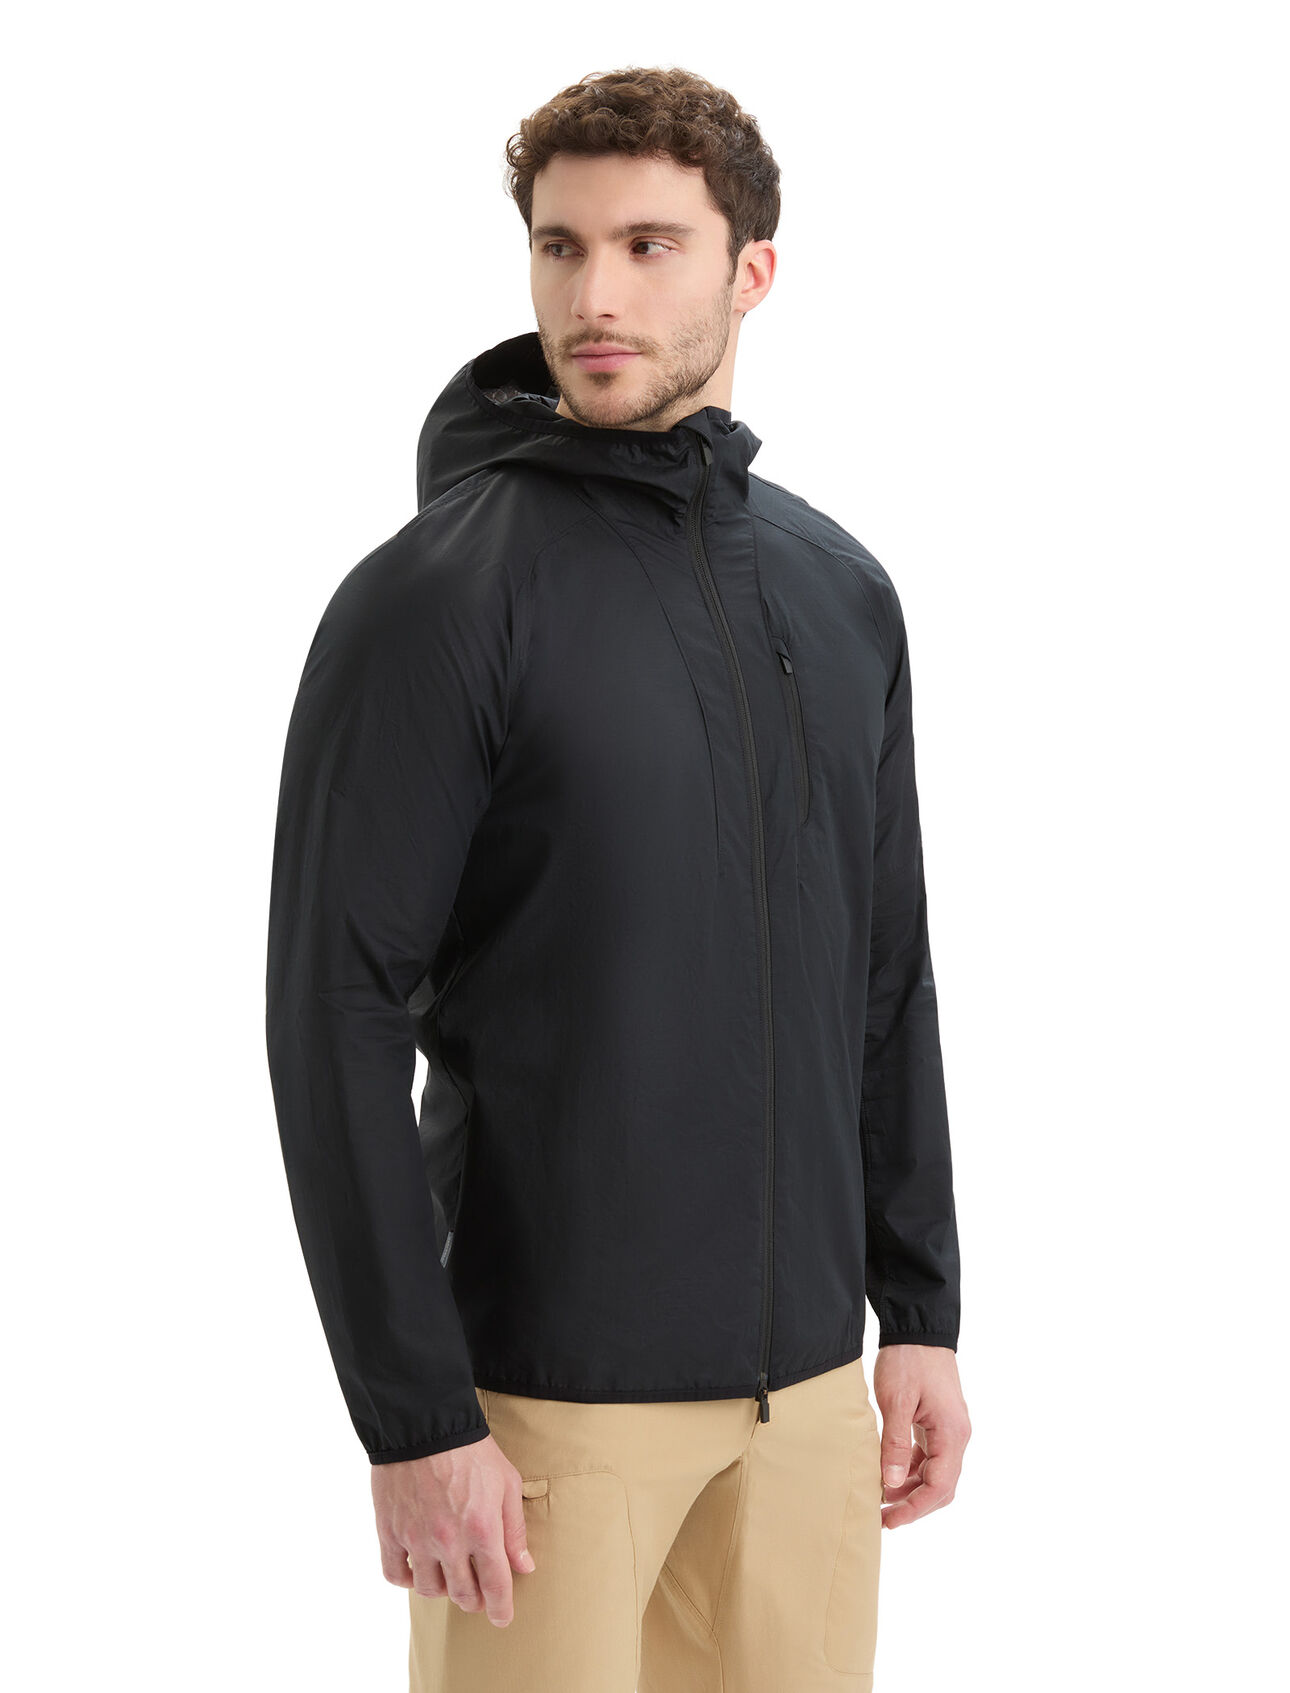 Mens Shell+™ Merino Blend Cotton Windbreaker A lightweight layer that shields against the wind and light rain during active mountain adventures, the Shell+™ Cotton Windbreaker puts a natural spin on technical outerwear.